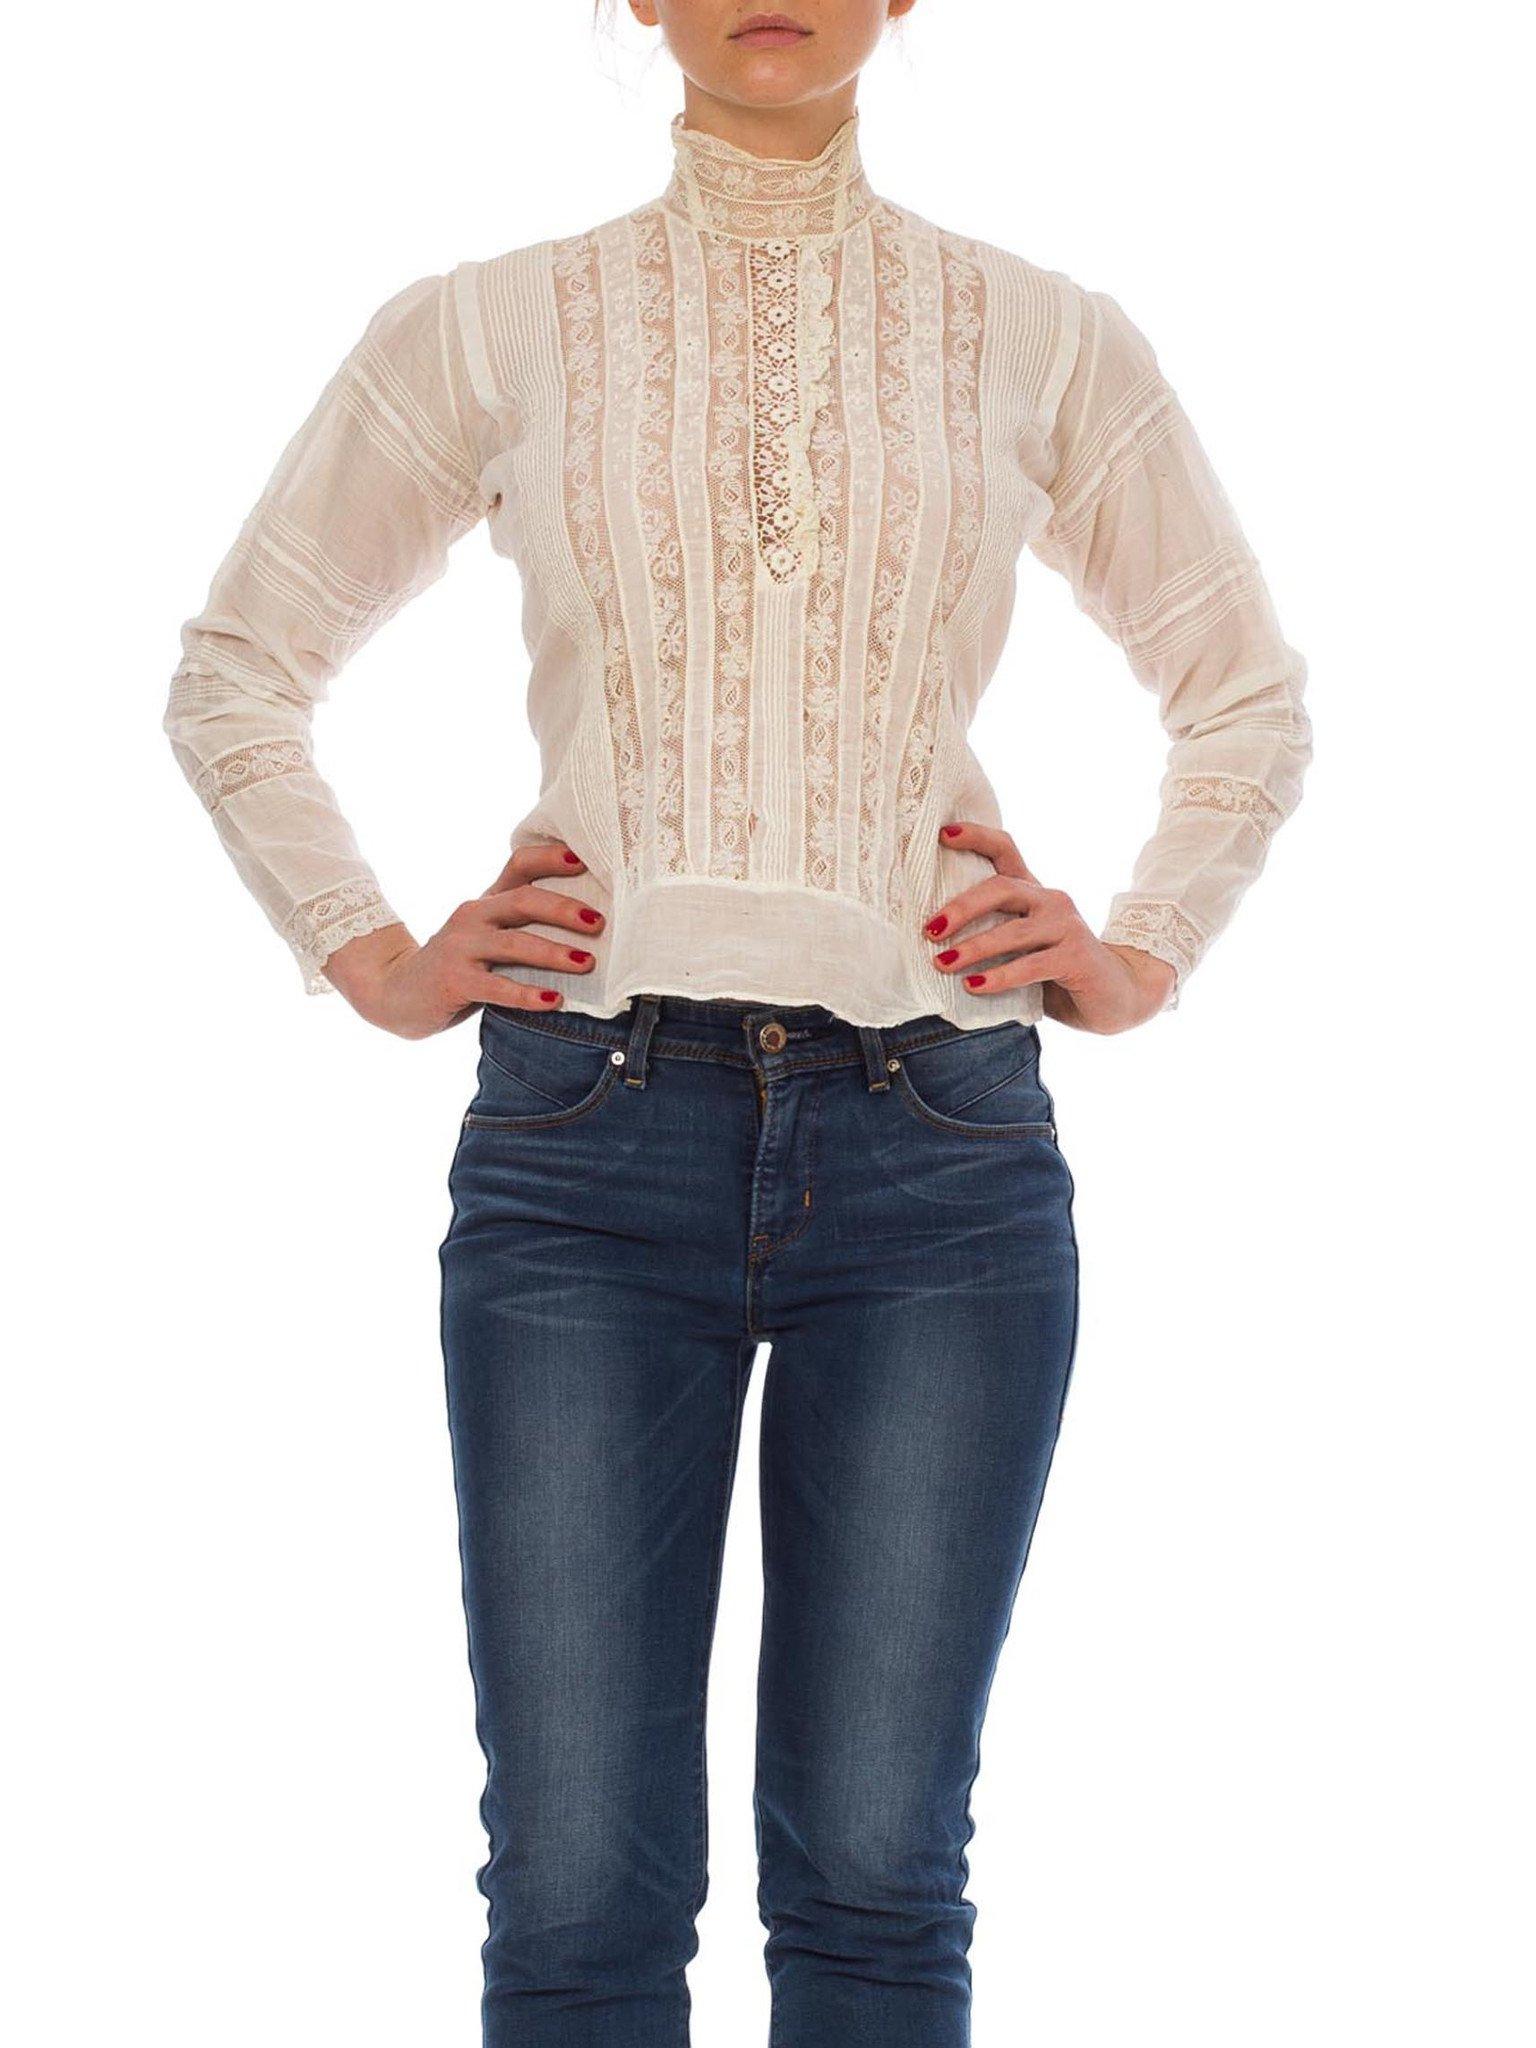 Victorian Cream Cotton & Lace High Swan Neck Blouse With Trim Sleeves Hand-Made Buttons